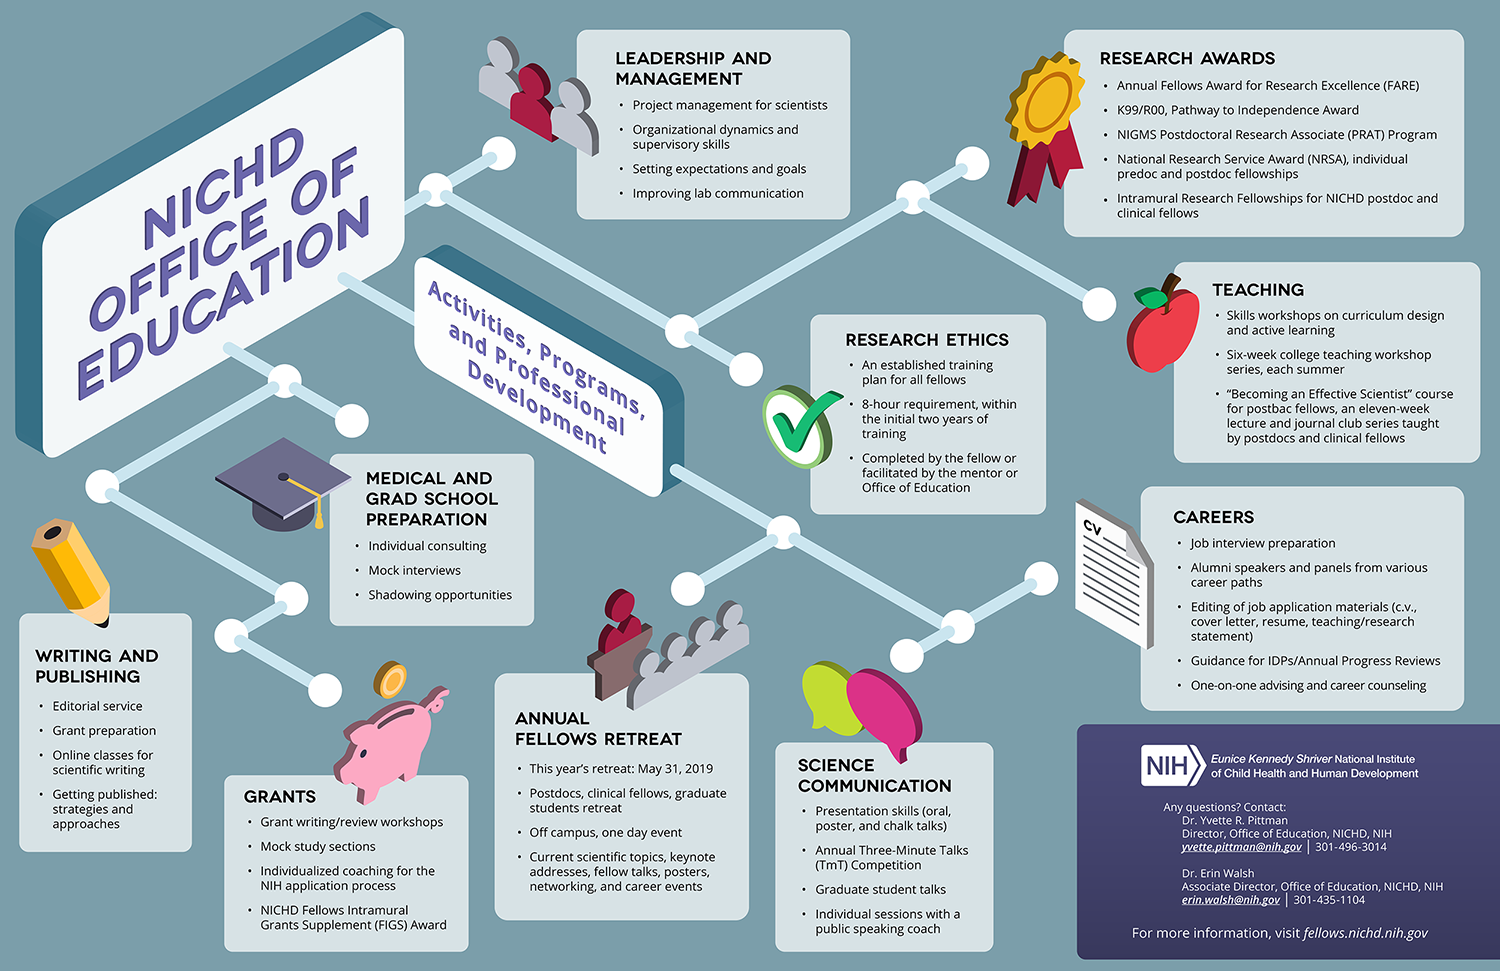 Infographic depicting the activities of the Office of Education, including: leadership and management; research awards; teaching; research ethics; careers; medical and grad school preparation; writing and publishing; grants; annual fellows retreat; and science communication.